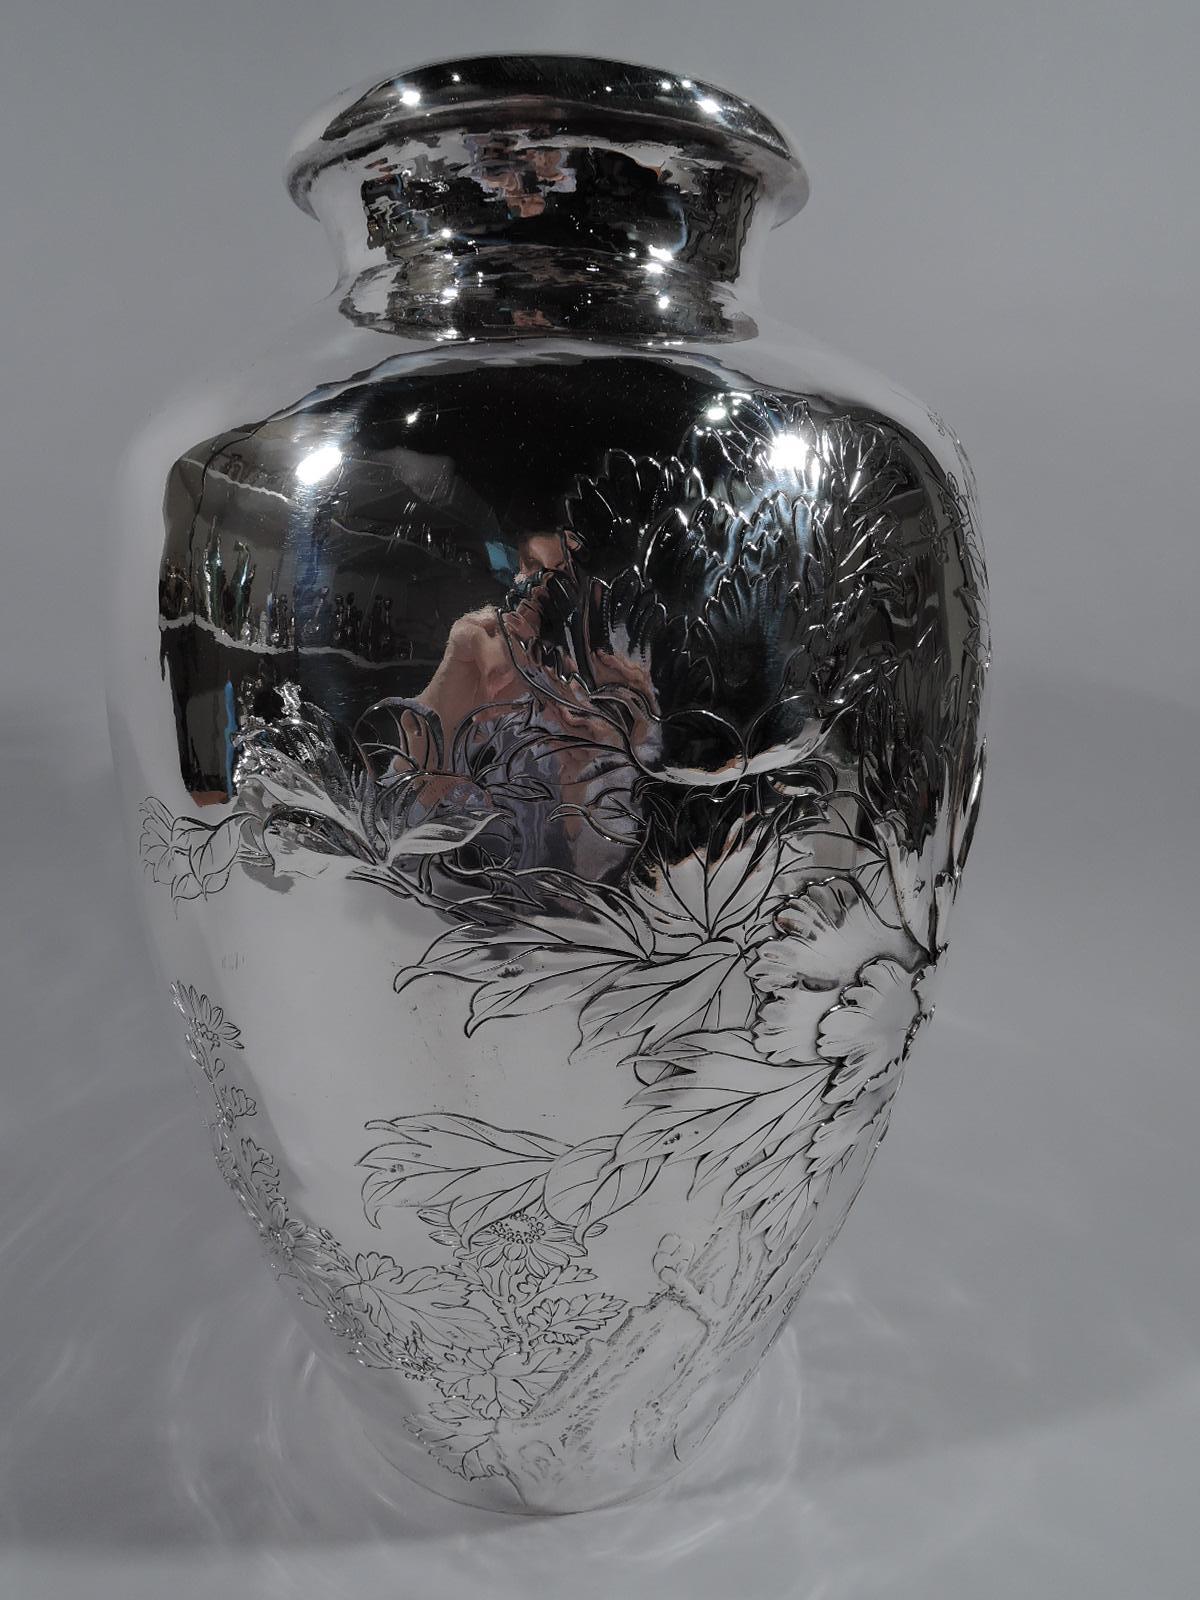 Large Japanese silver vase, circa 1910. Ovoid with short neck and turned-down rim. On front chased chrysanthemum flower heads with veined, serrated, and overlapping petals, blossoming prunus branch, and leaves. The decoration meanders around the